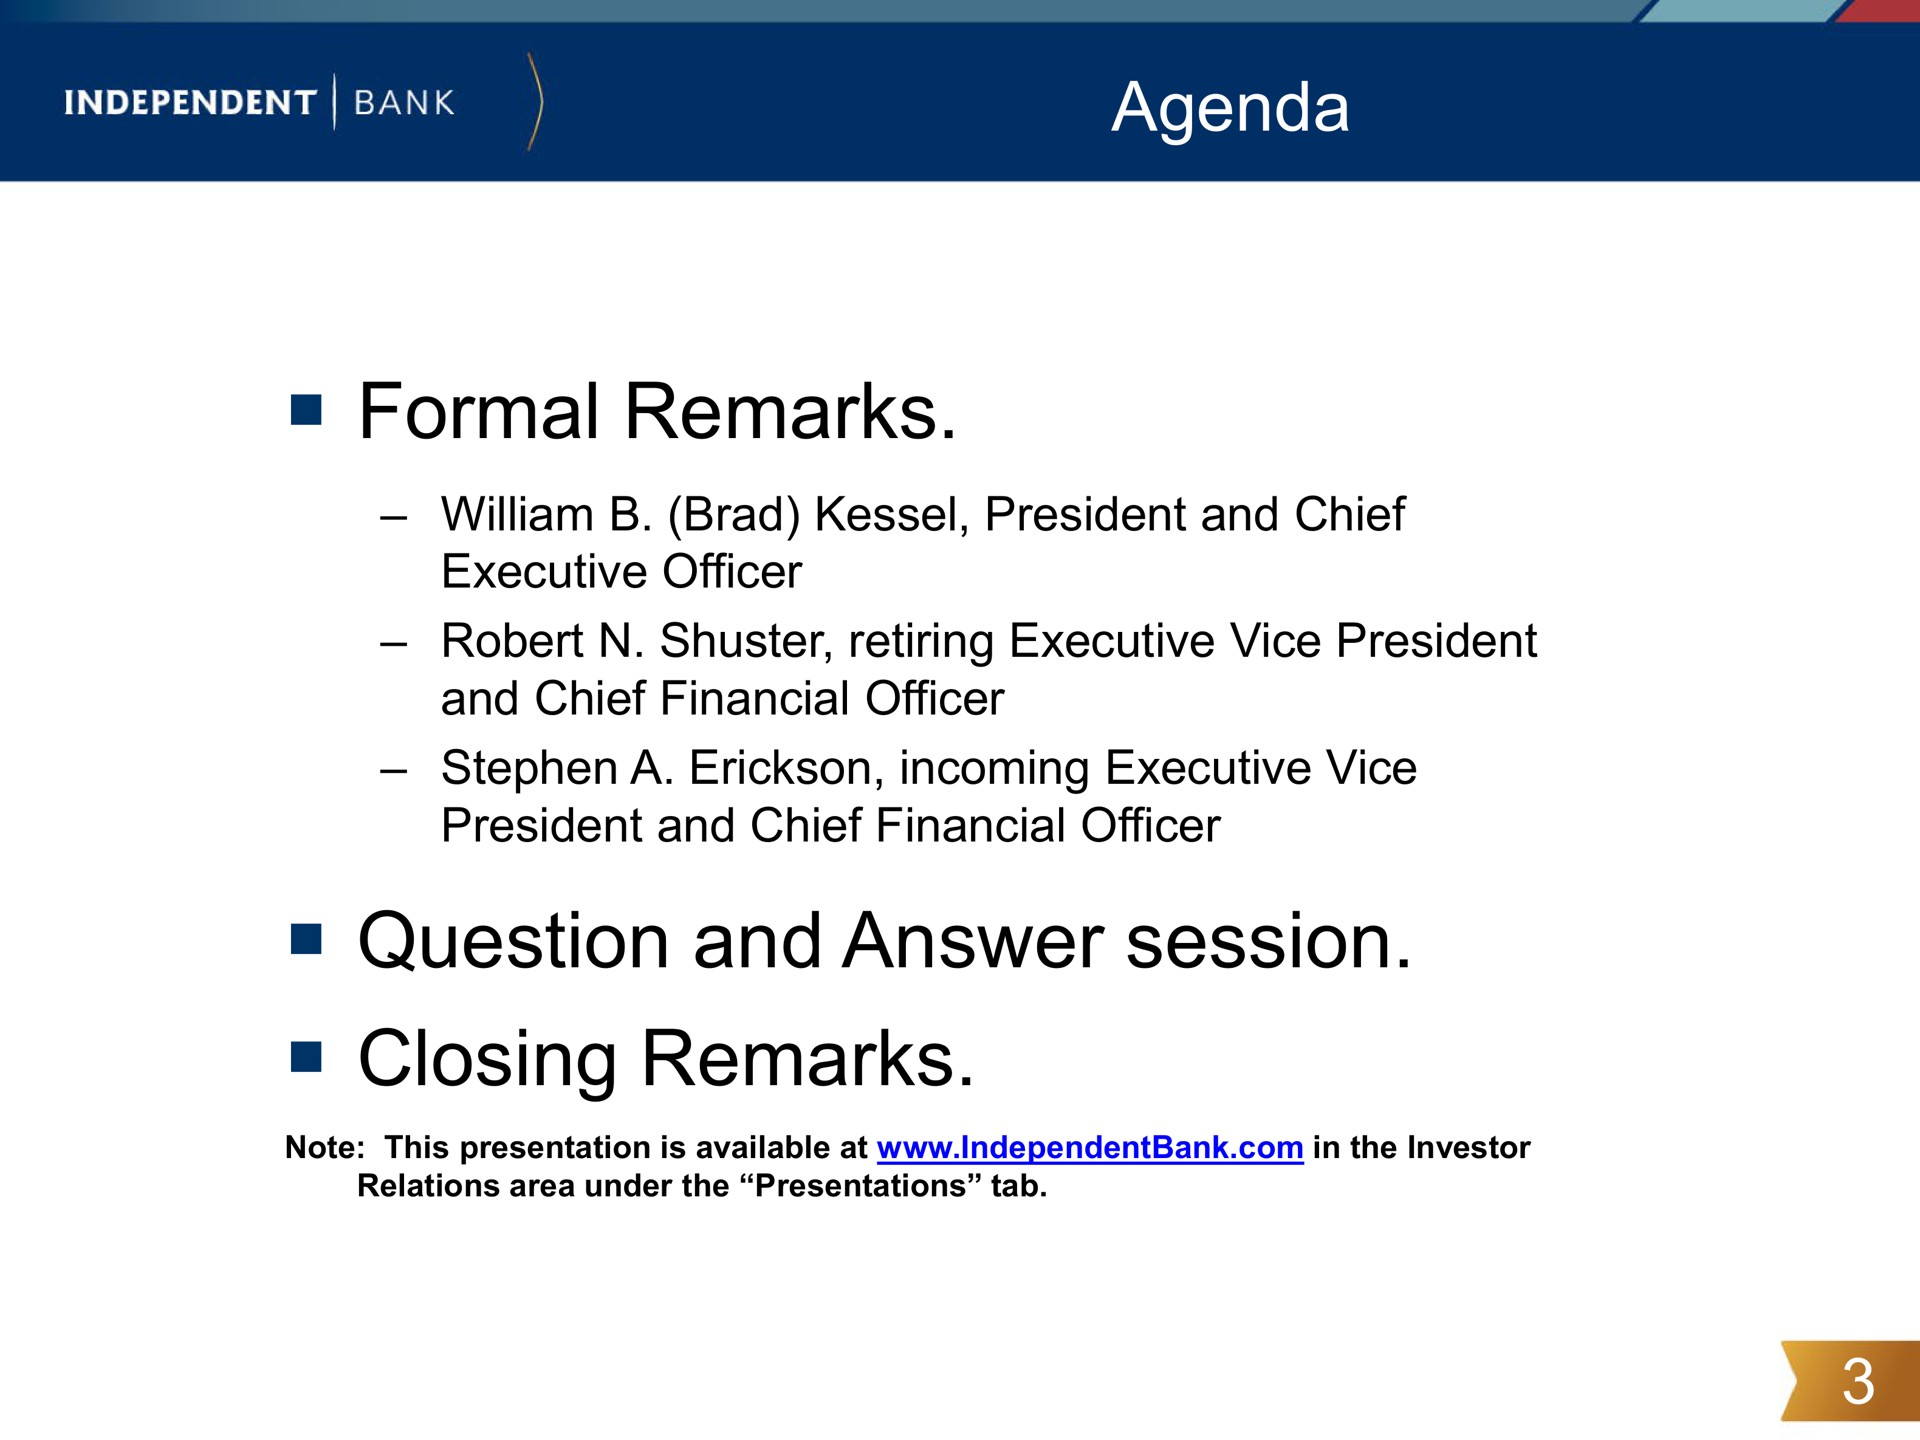 agenda formal remarks question and answer session closing remarks | Independent Bank Corp